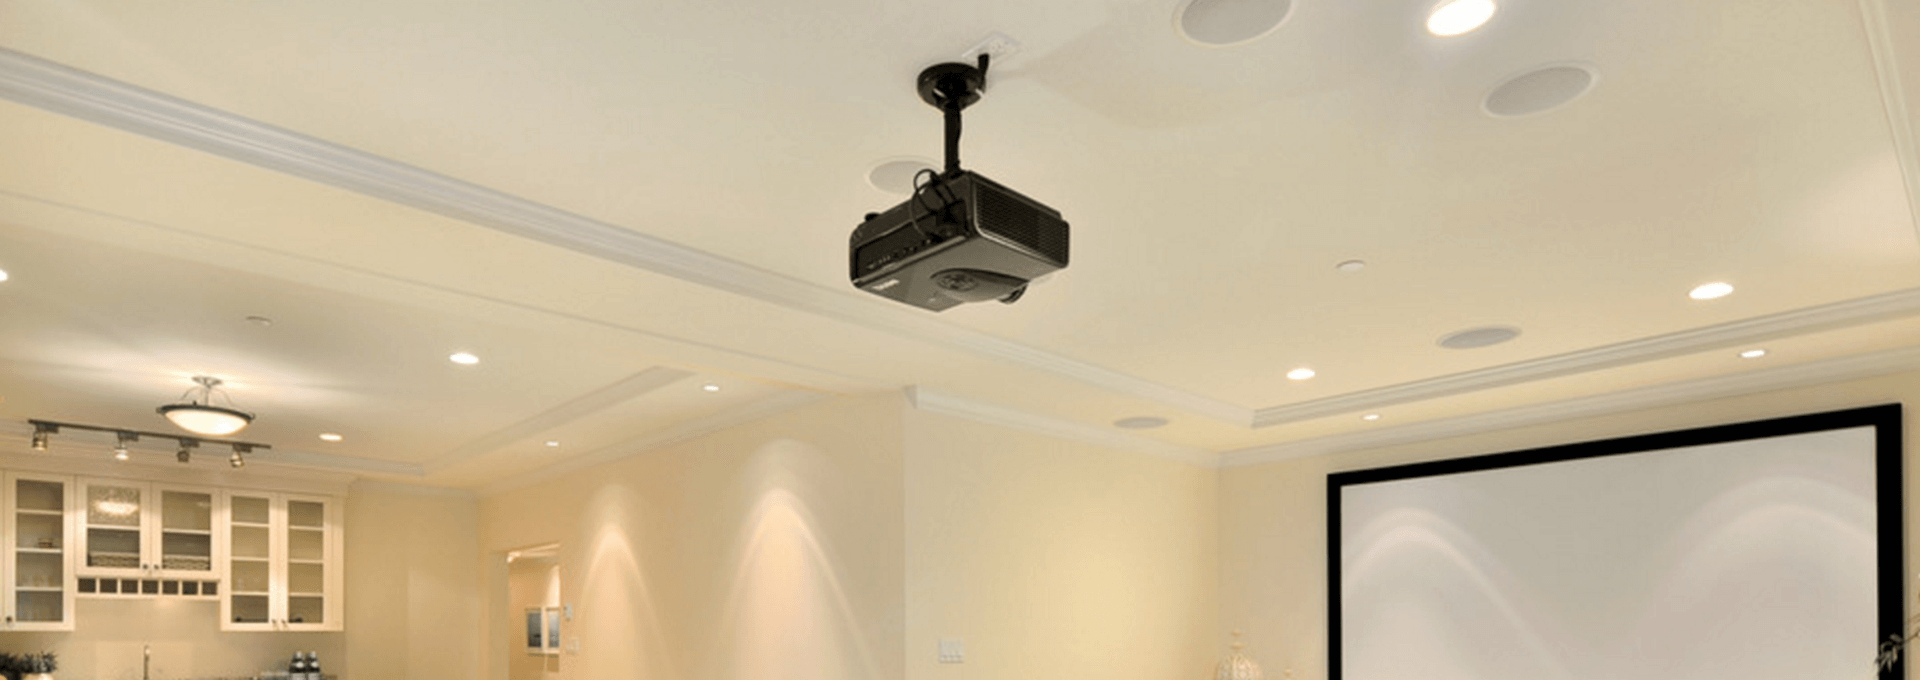 Projection Screen Manufacturer Circular Tube Projector Ceiling Mount